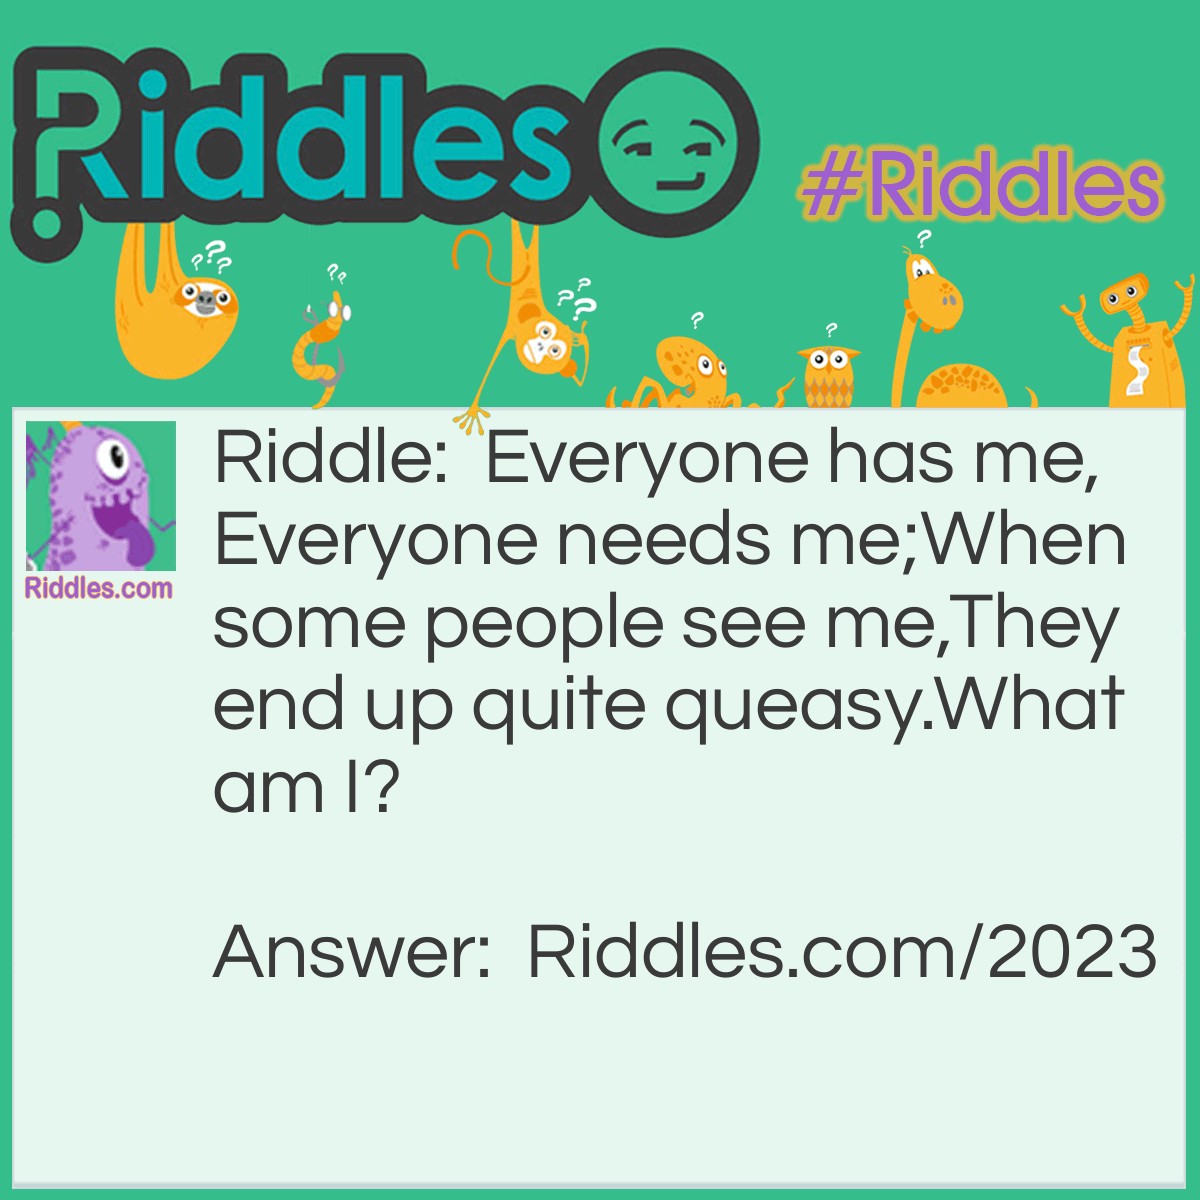 Riddle: Everyone has me, 
Everyone needs me; 
When some people see me, 
They end up quite queasy. 
What am I? Answer: I am Blood.